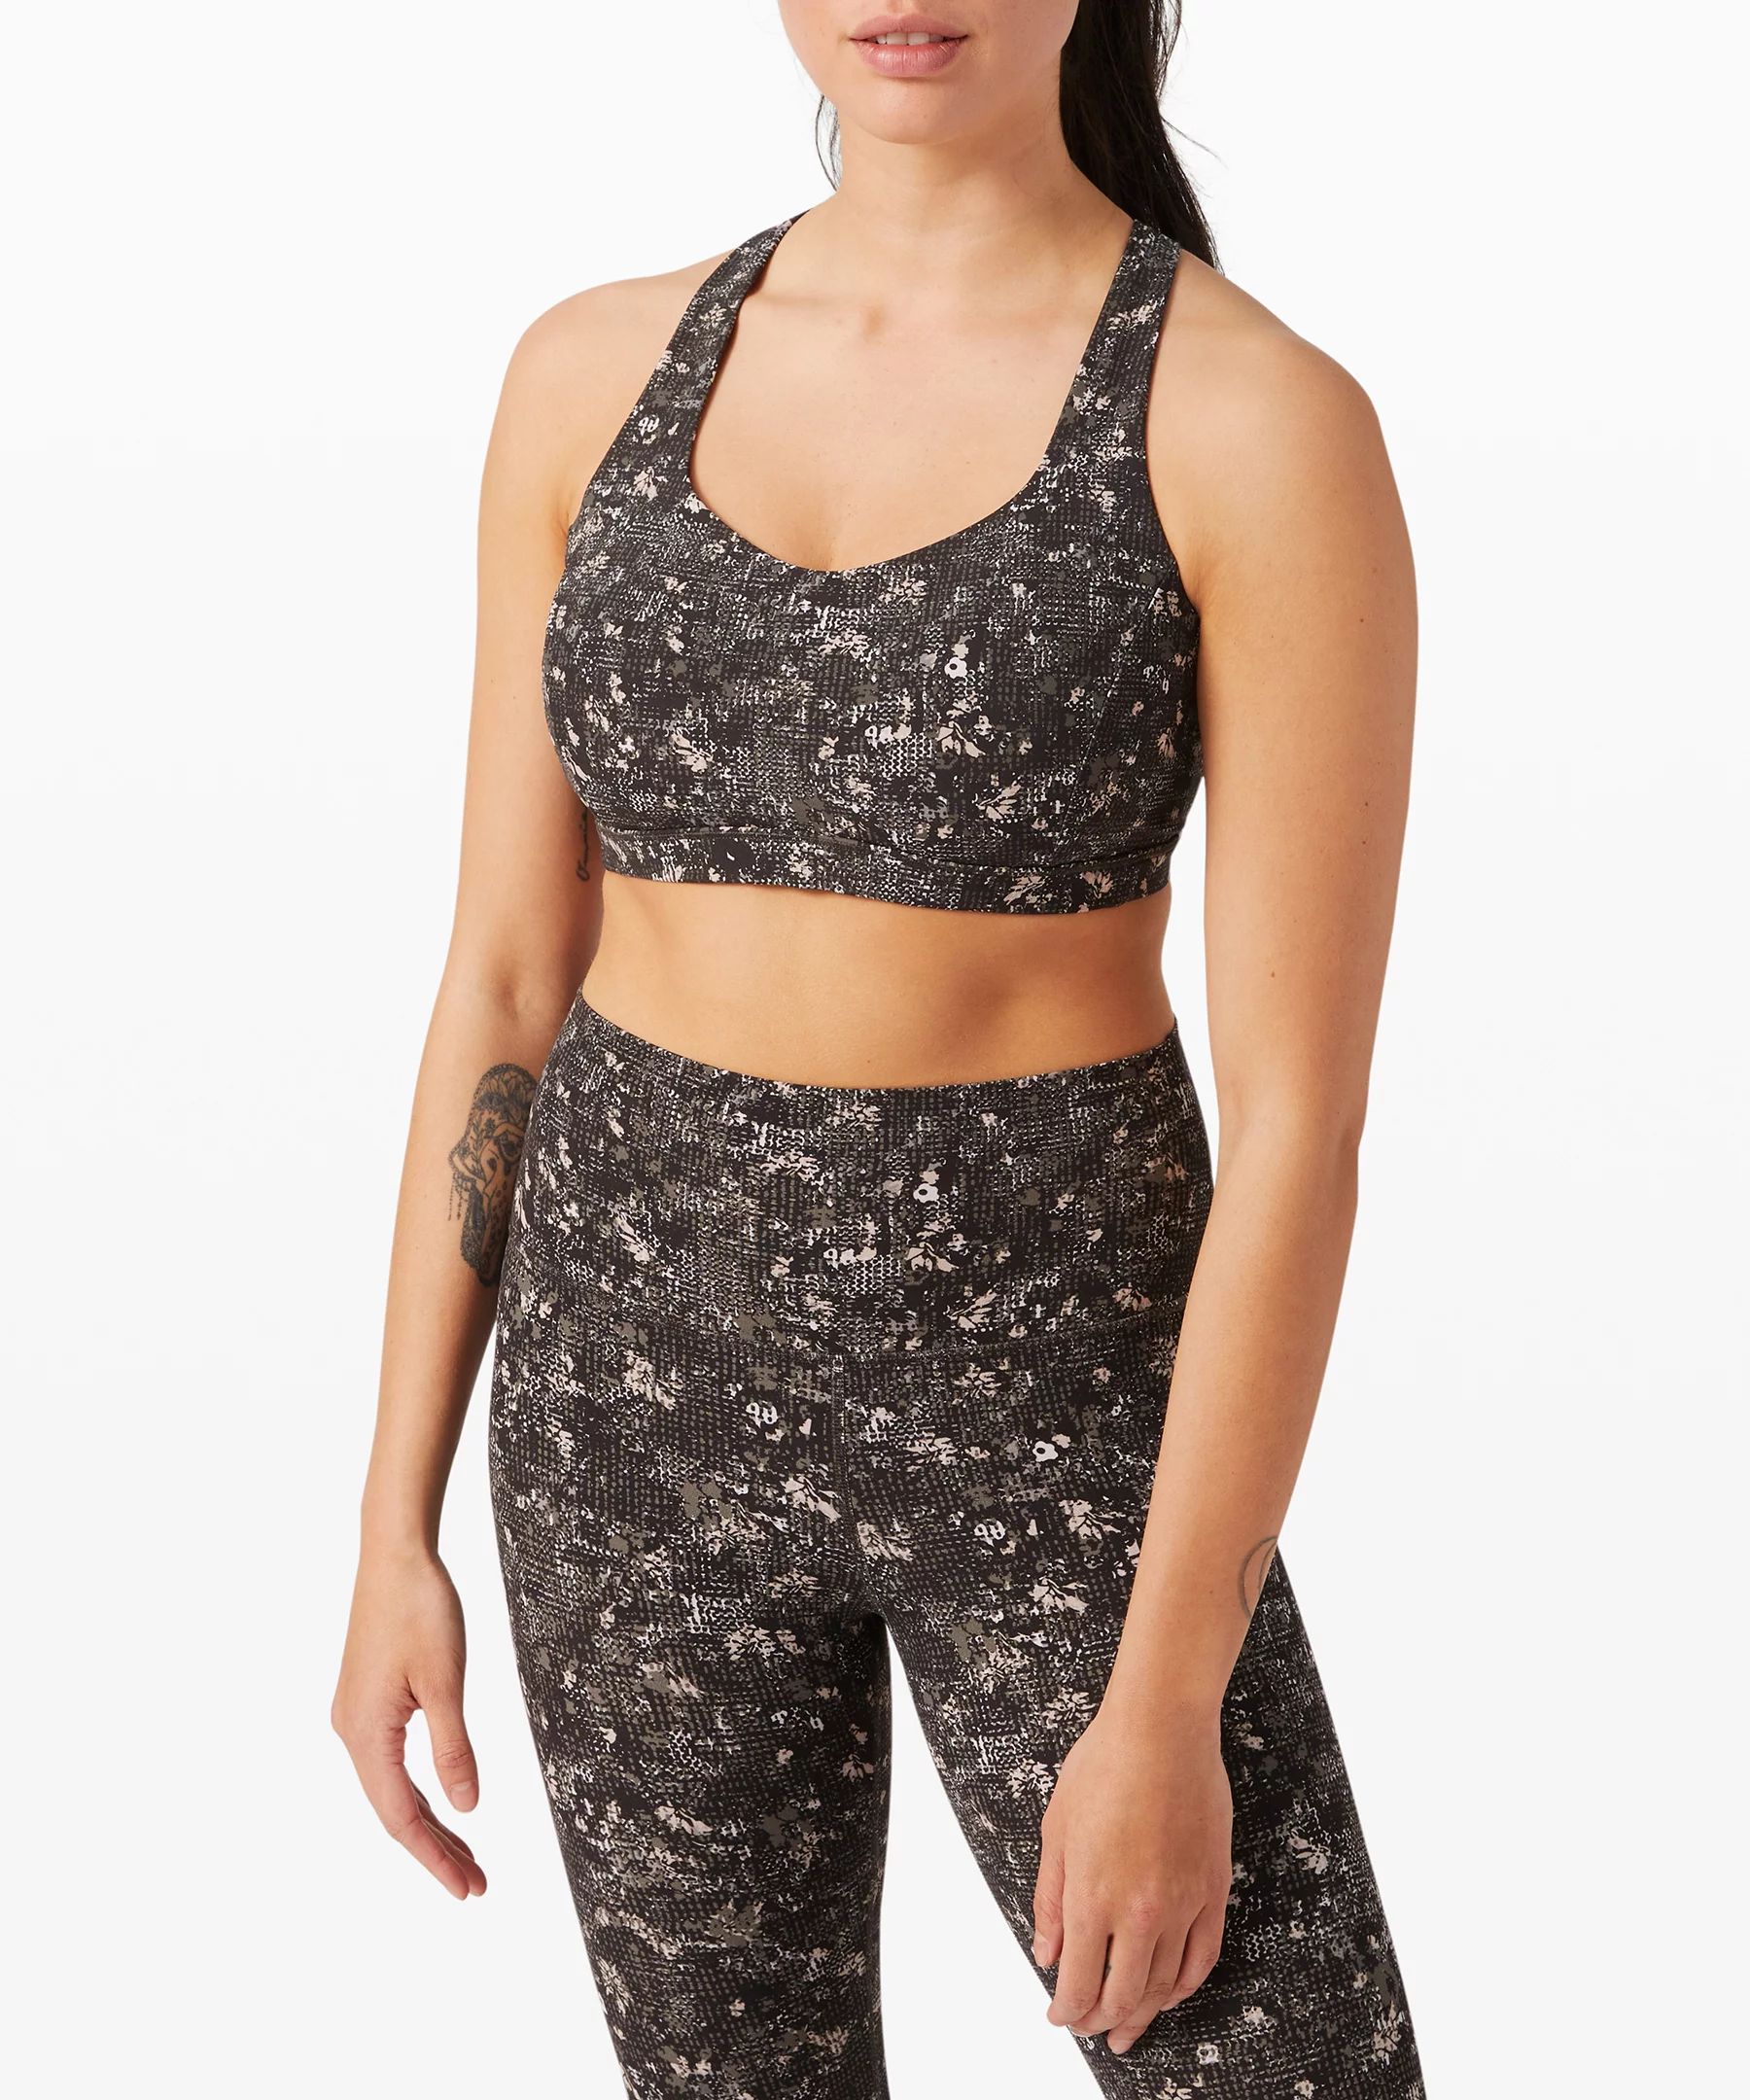 Free To Be Serene Bra Light Support, C/D Cup | Lululemon (US)